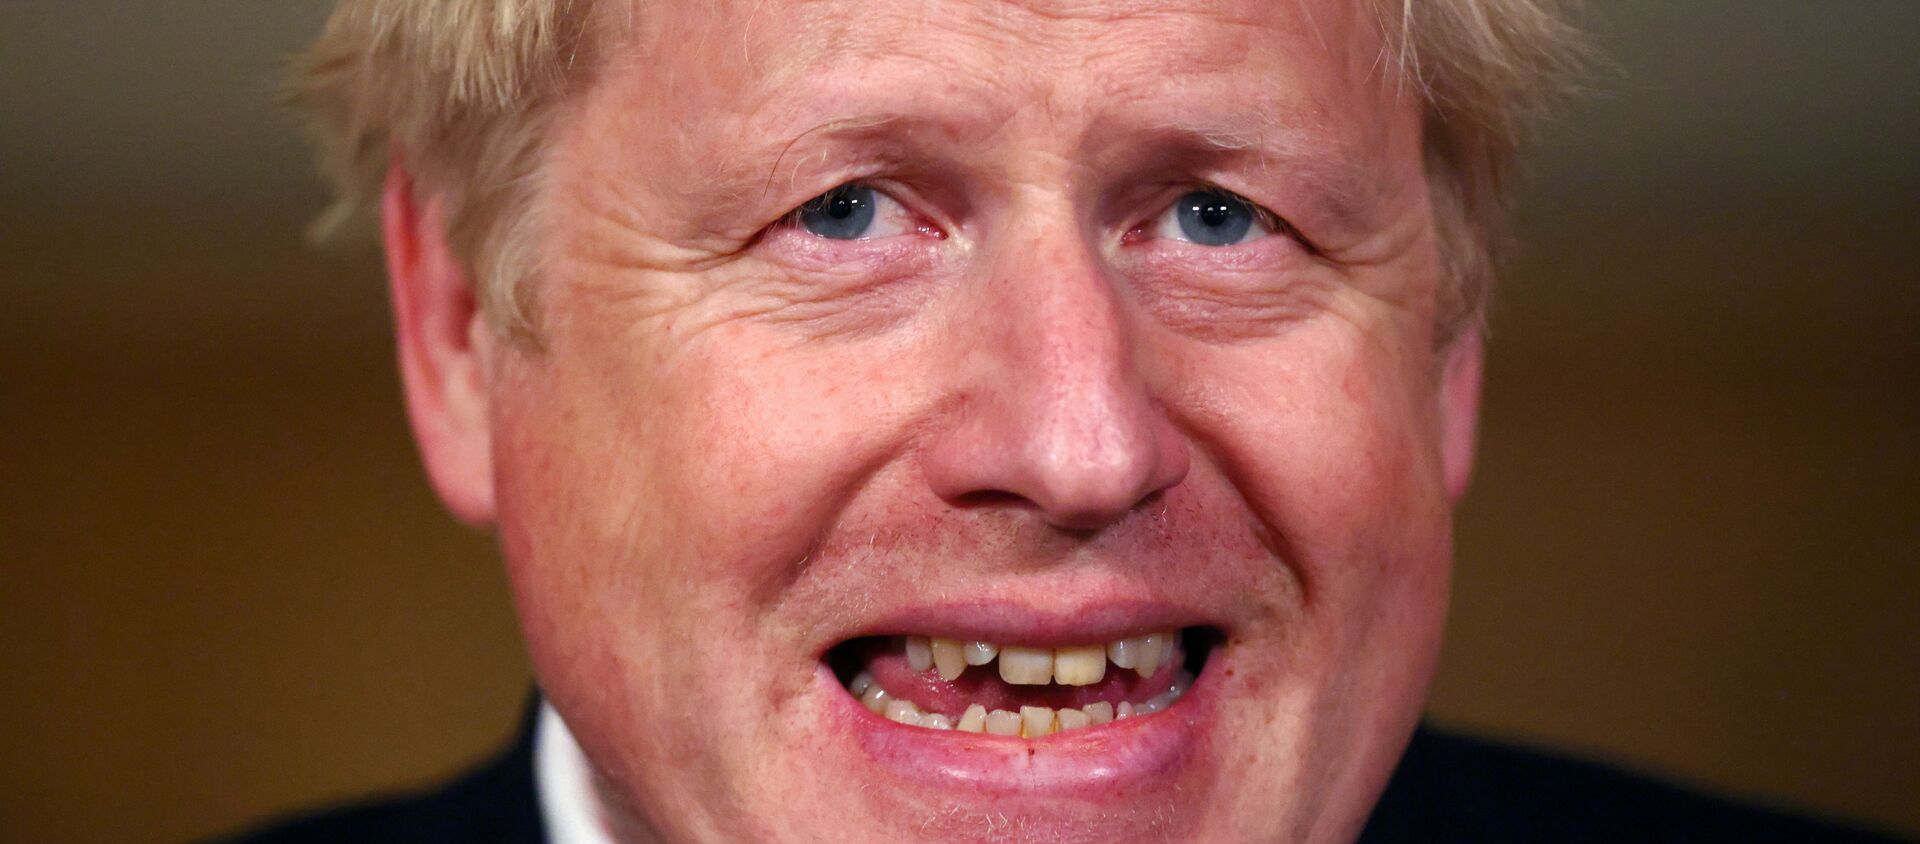 Britain's Prime Minister Boris Johnson attends a news conference amidst the spread of the coronavirus disease (COVID-19), at Downing Street in London, Britain, October 22, 2020. - Sputnik International, 1920, 27.11.2020